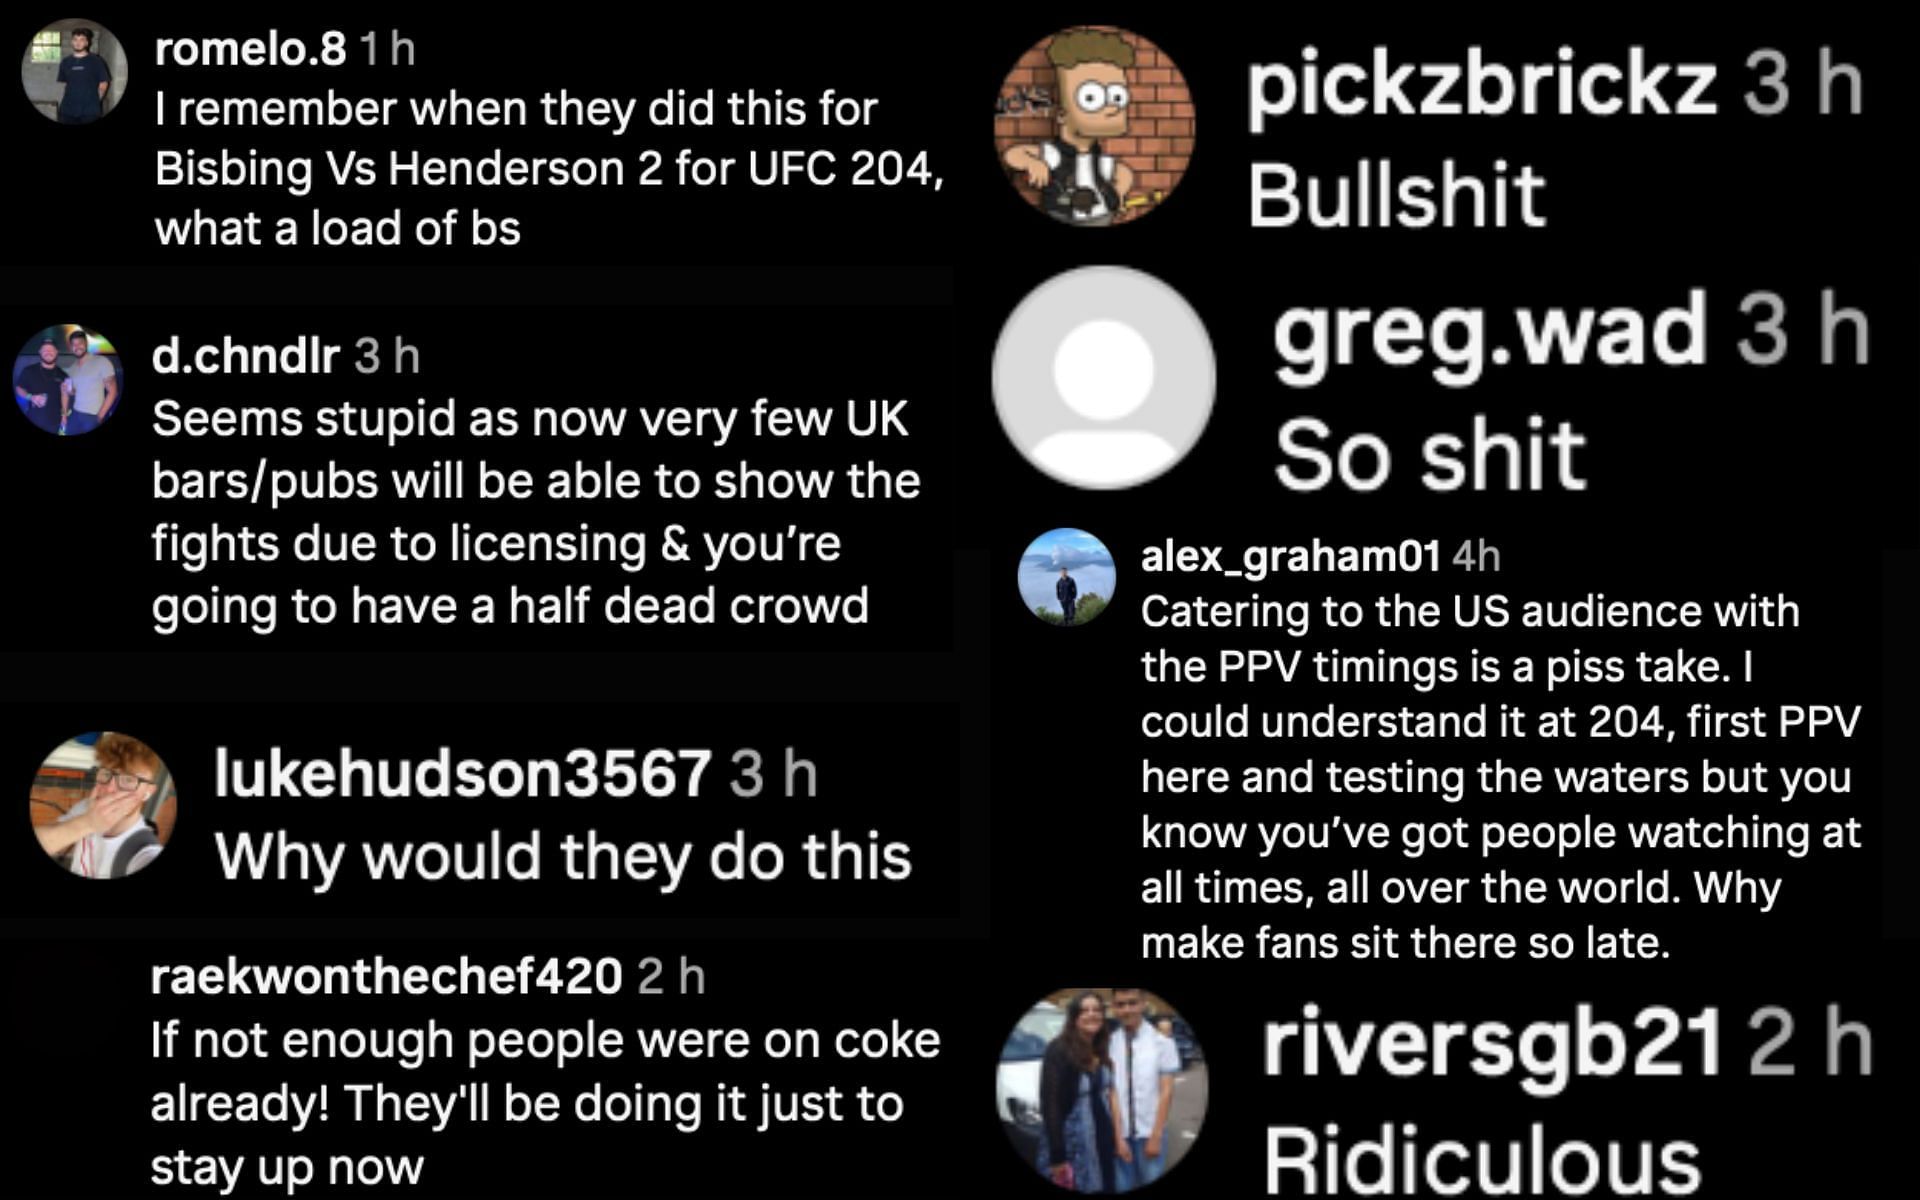 Fans react strongly against the UFC 304 timings favoring United States prime time. [via Instagram]